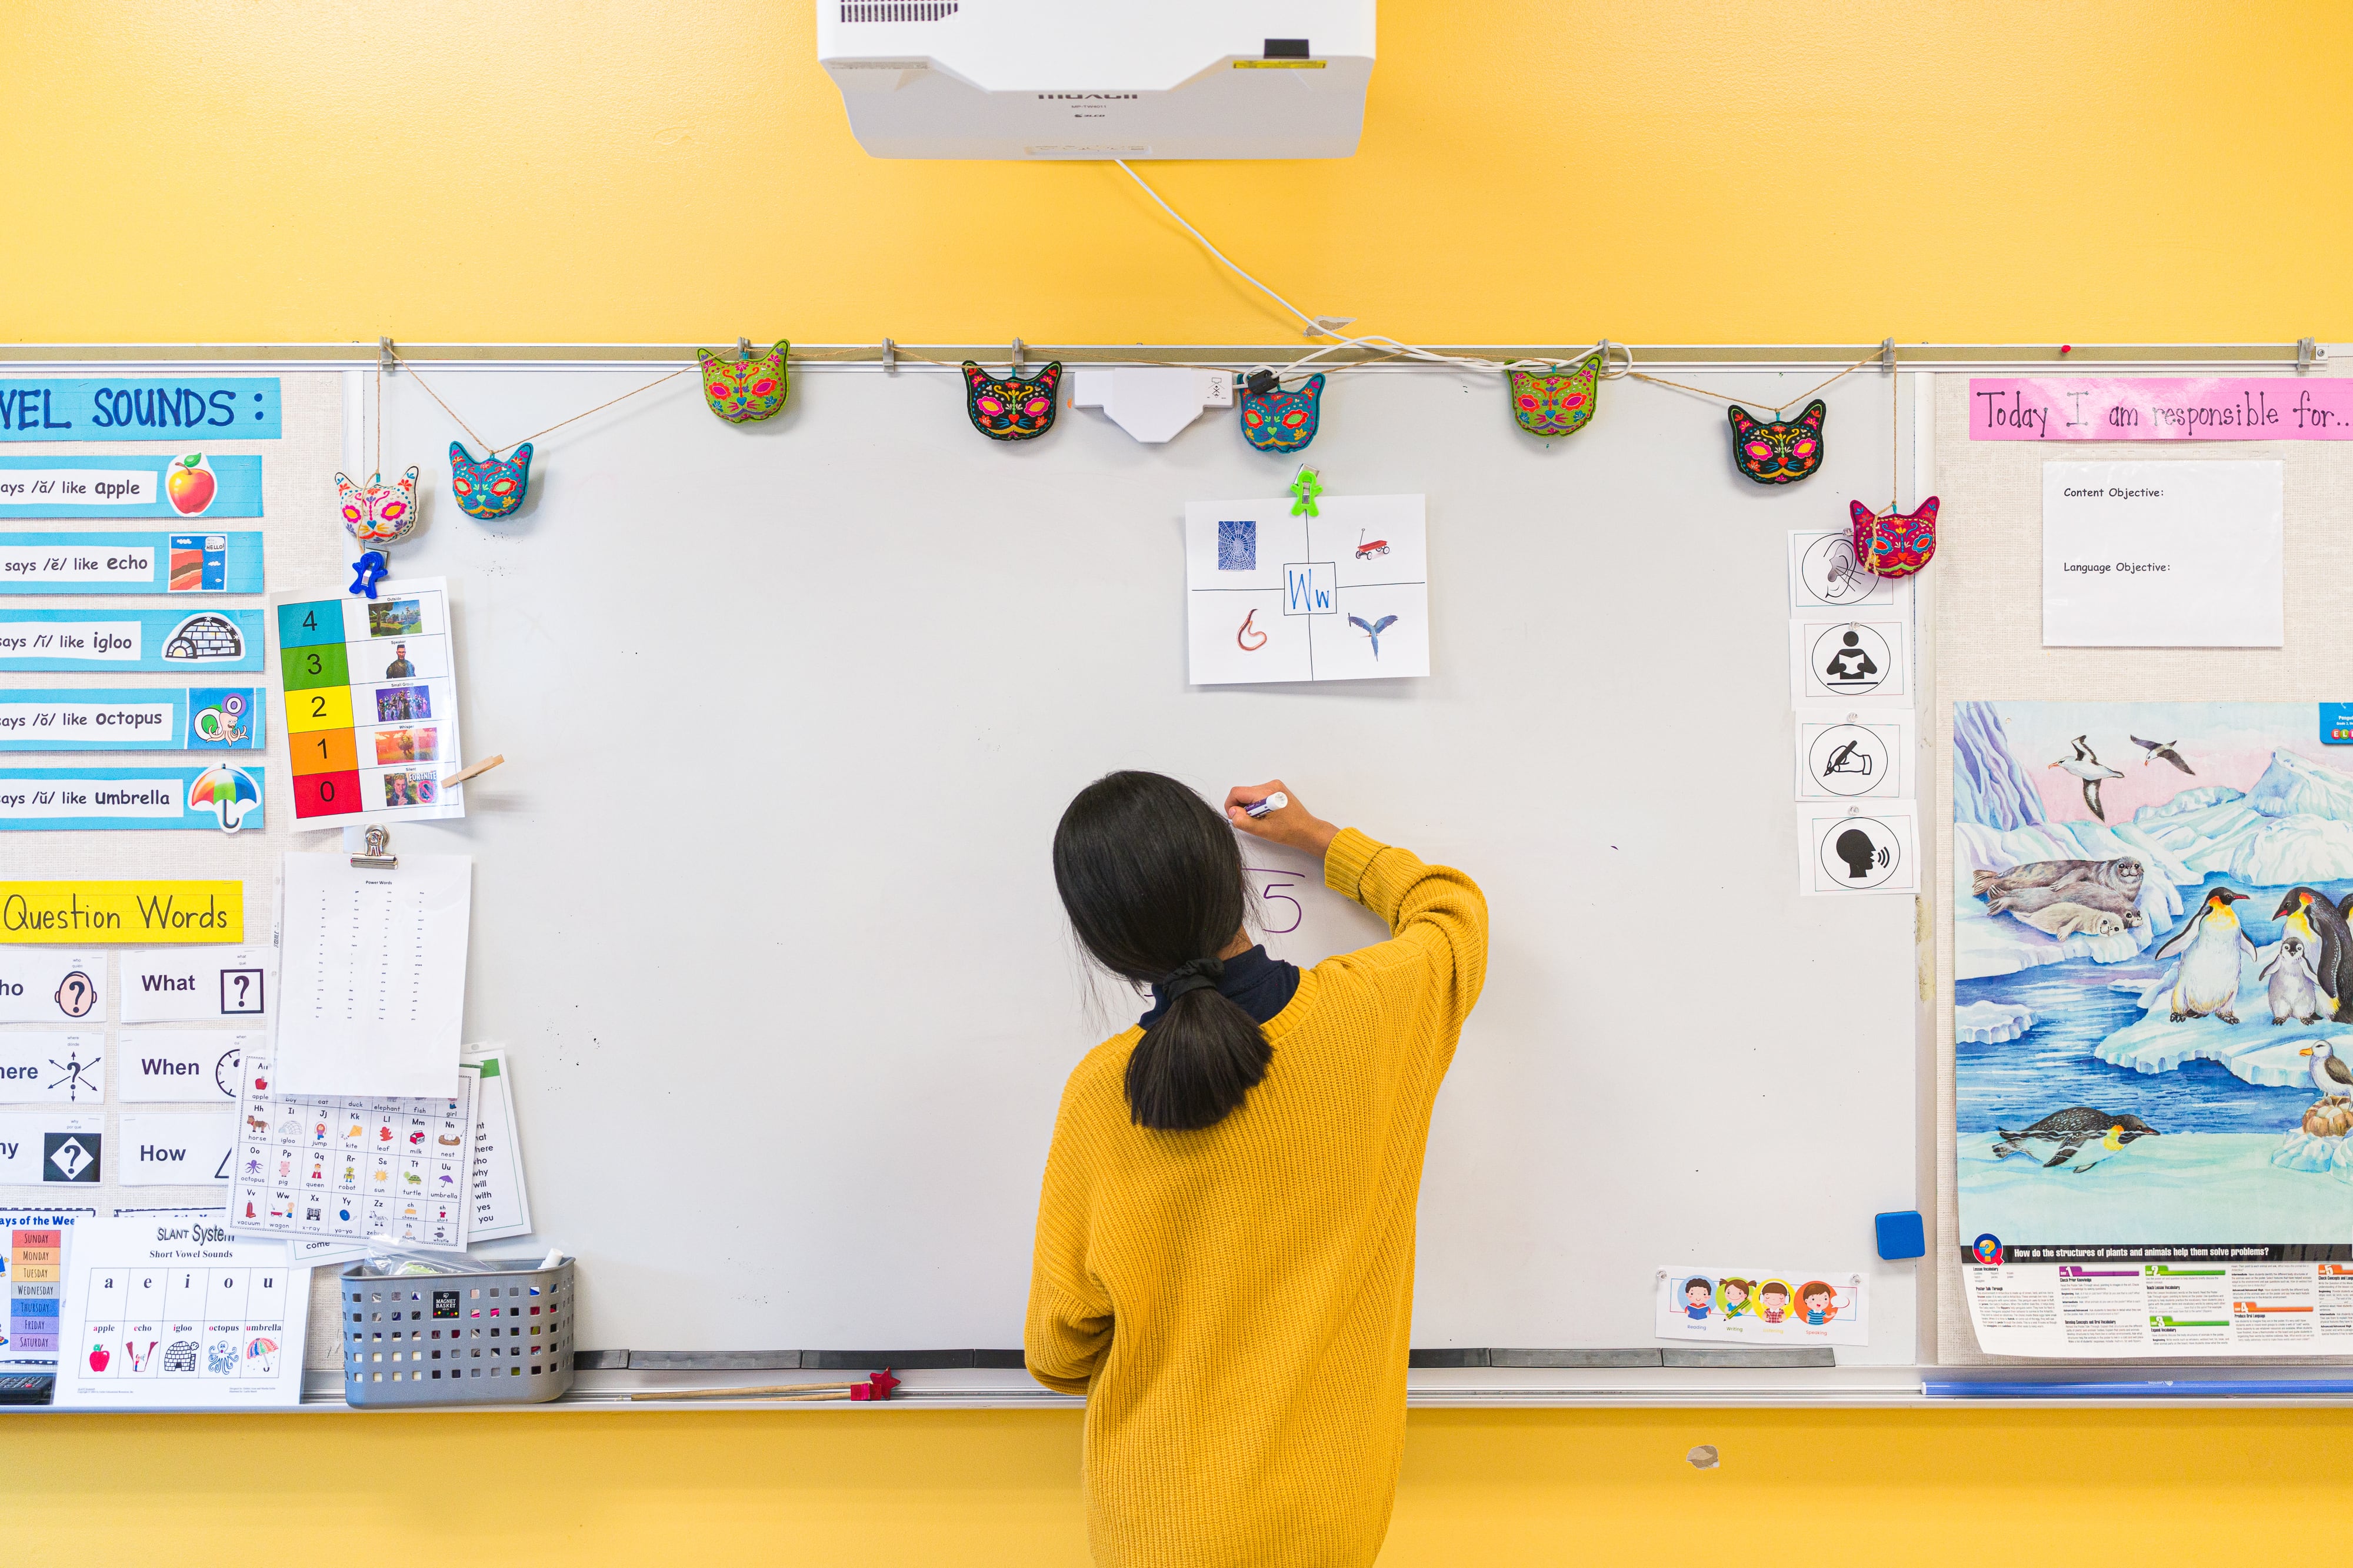 A student, wearing a yellow sweater, writes on a whiteboard that hangs on a bright yellow wall.